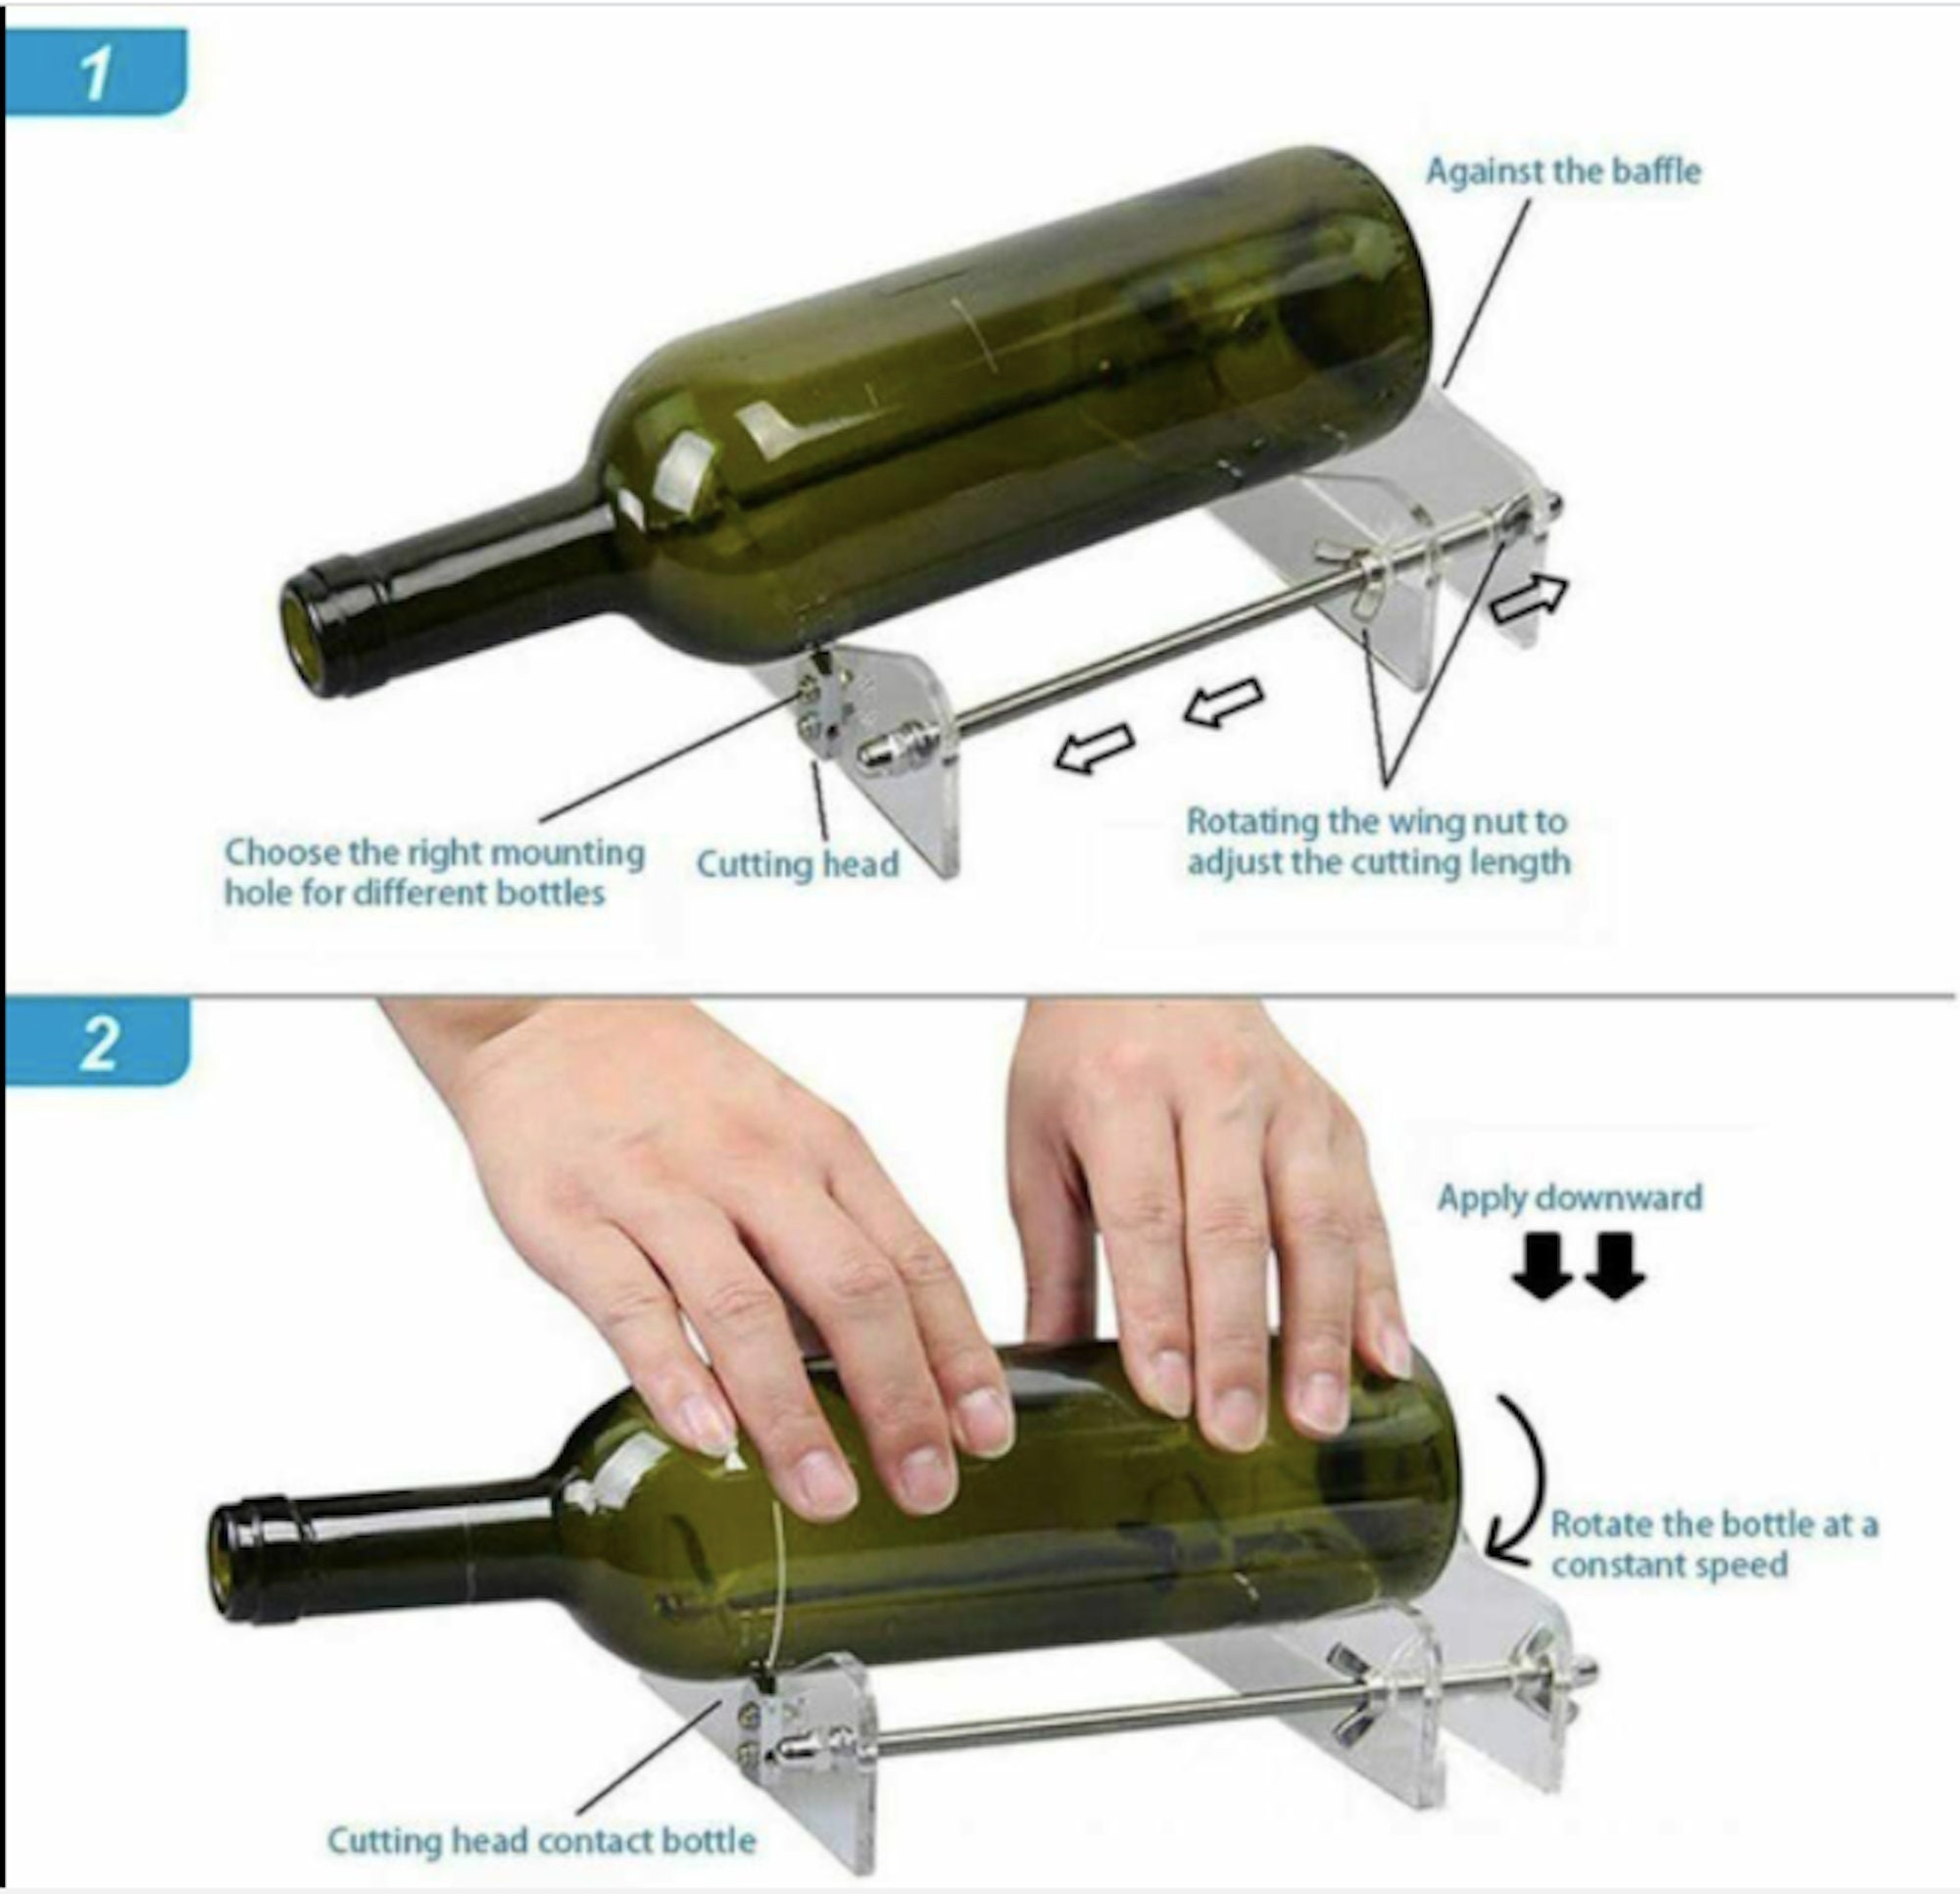 Glass Bottle Cutter & Accessories Kit, Upgraded Glass Cutter for Bottles,  DIY Machine for Cutting Wine, Beer, Liquor, Whiskey, Alcohol, Champagne,  Bottle Cutter for Mirrors/Tiles/Glass/Mosaic. - camdios